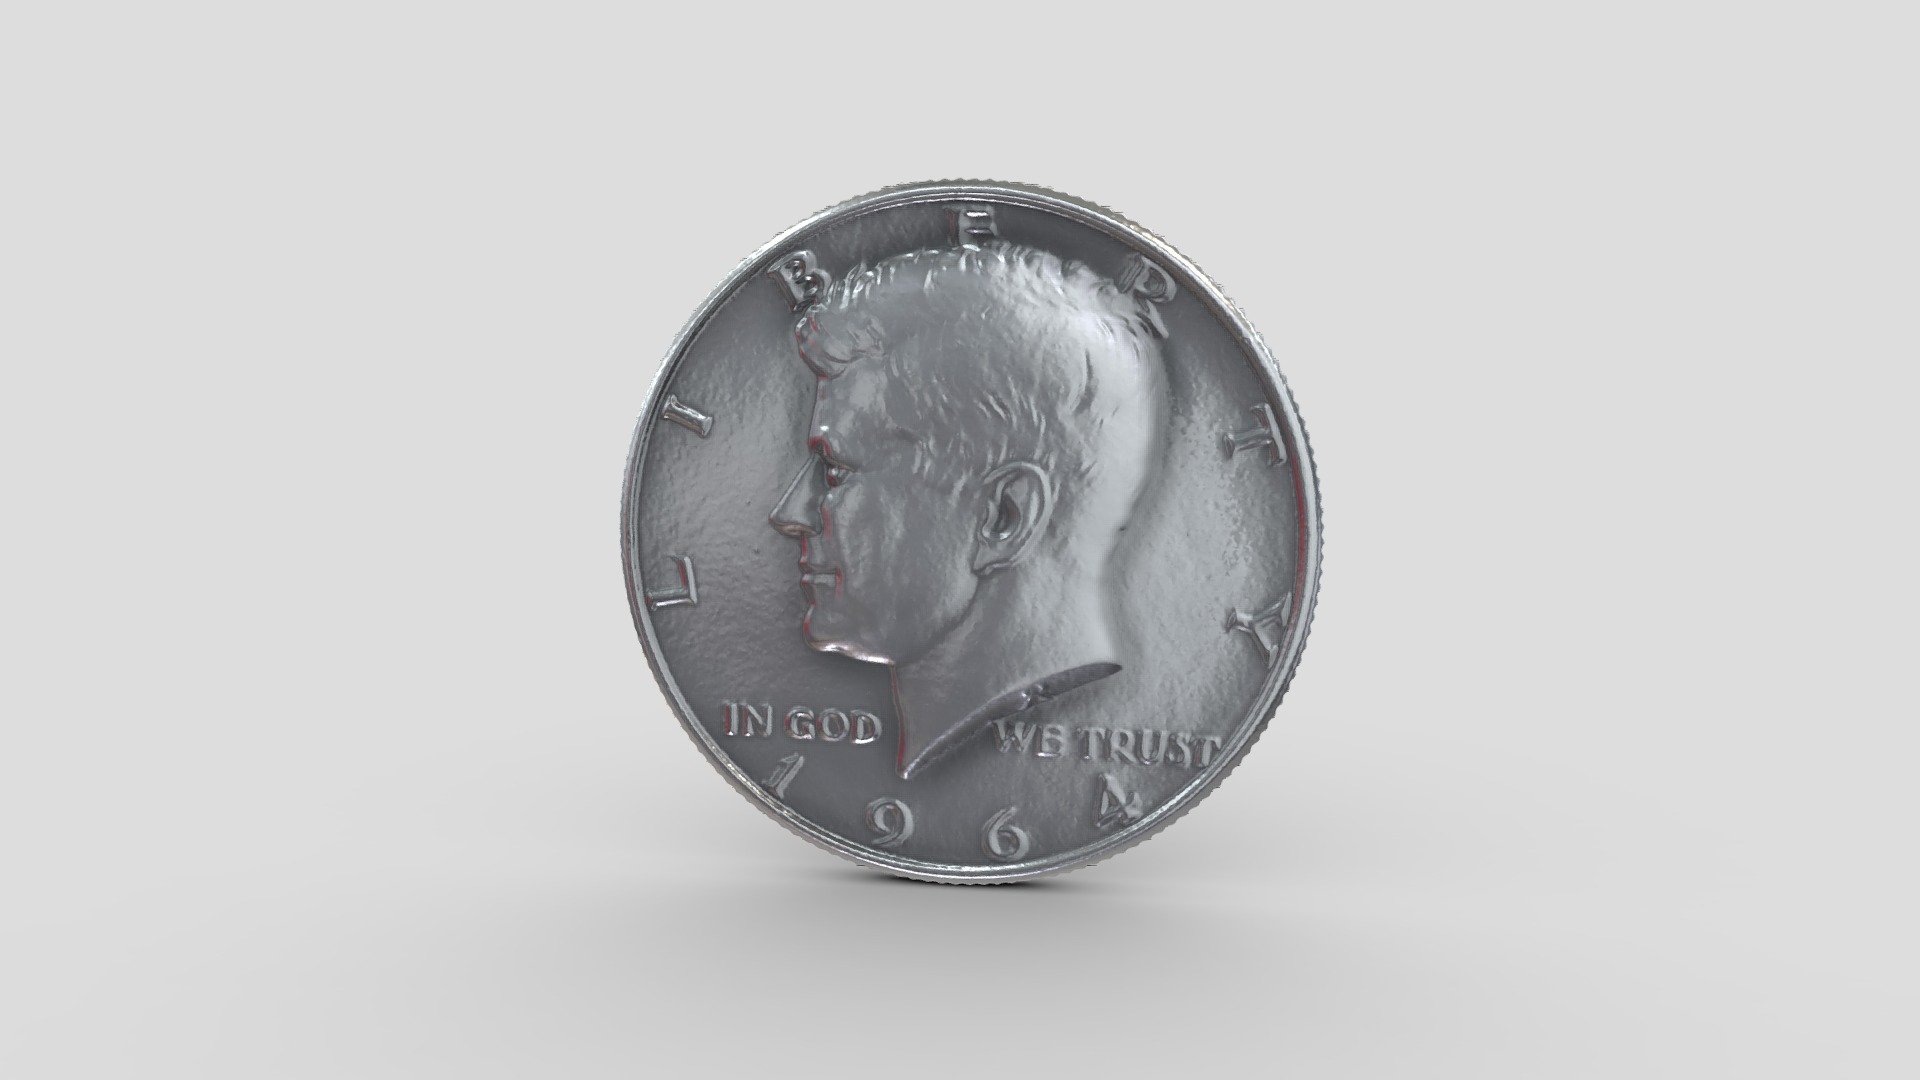 The Kennedy half dollar, first minted in 1964, is a fifty-cent coin issued by the United States Mint. Intended as a memorial to the assassinated 35th president of the United States John F. Kennedy, it was authorized by Congress just over a month after his death. Use of existing works by Mint sculptors Gilroy Roberts and Frank Gasparro allowed dies to be prepared quickly, and striking of the new coins began in January 1964. 

3d Scan of a Kennedy half dollar which was first minted in 1964 by the United States mint. It was intended as a memorial to John F Kennedy, who was murdered in 1963.  It was one of the last coins to contain 90% silver and therefore very few were seen in circulation.

Download Includes 4 million poly obj at original resolution.

Scan made with Artec Micro https://europac3d.com/3d-scanners/artec-micro-uk/ - Half Dollar Coin - Kennedy 1964 - Buy Royalty Free 3D model by Europac3d 3d model